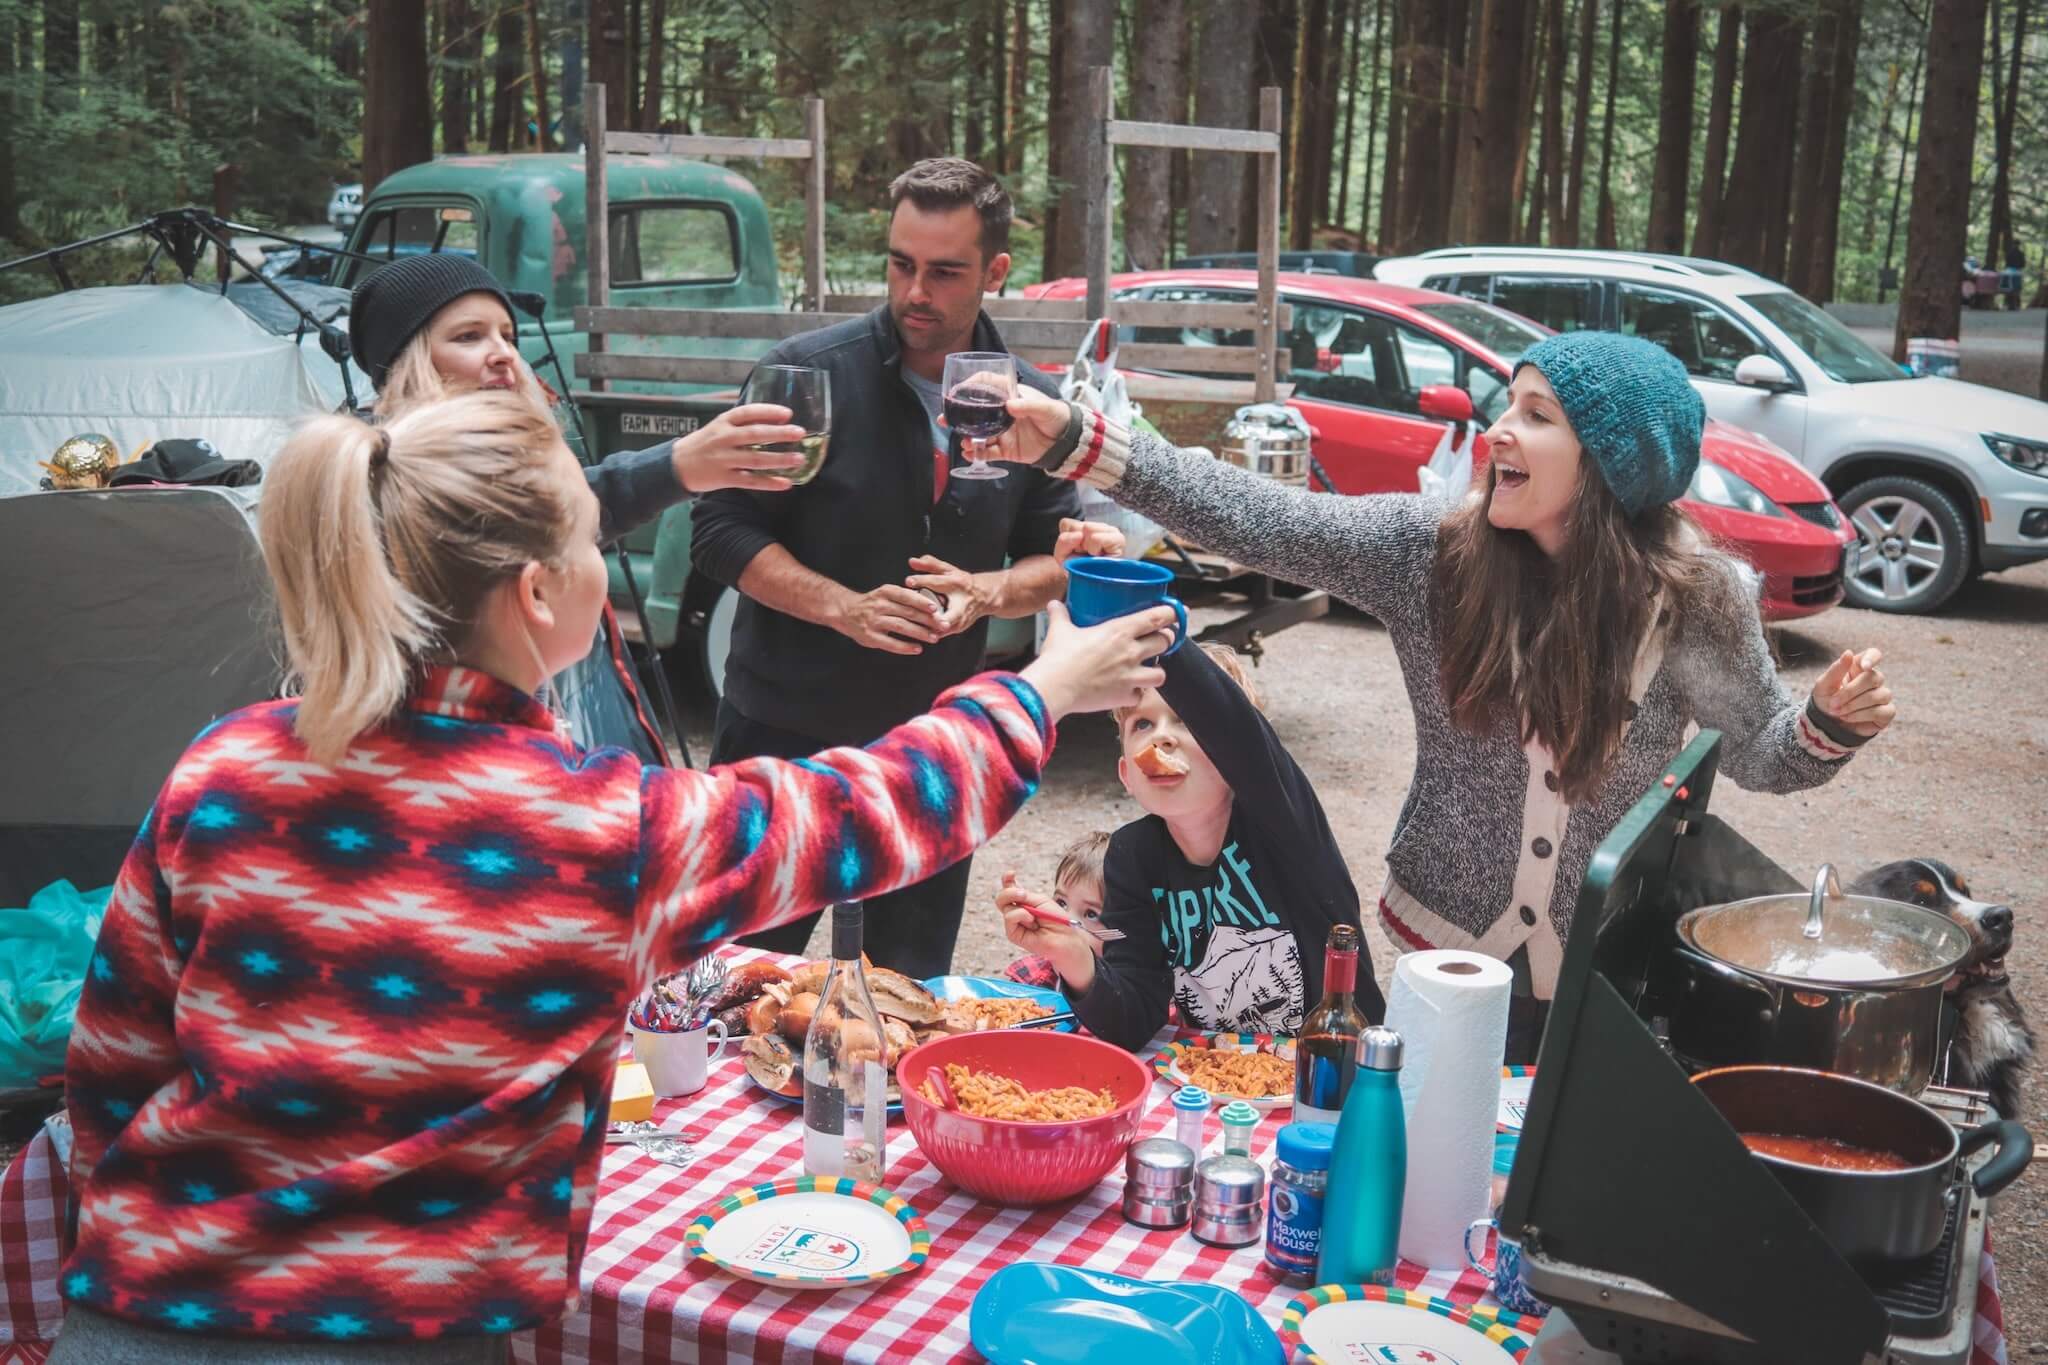 A group of millennial friends toasting a meal at a Good Sam campsite in the forest